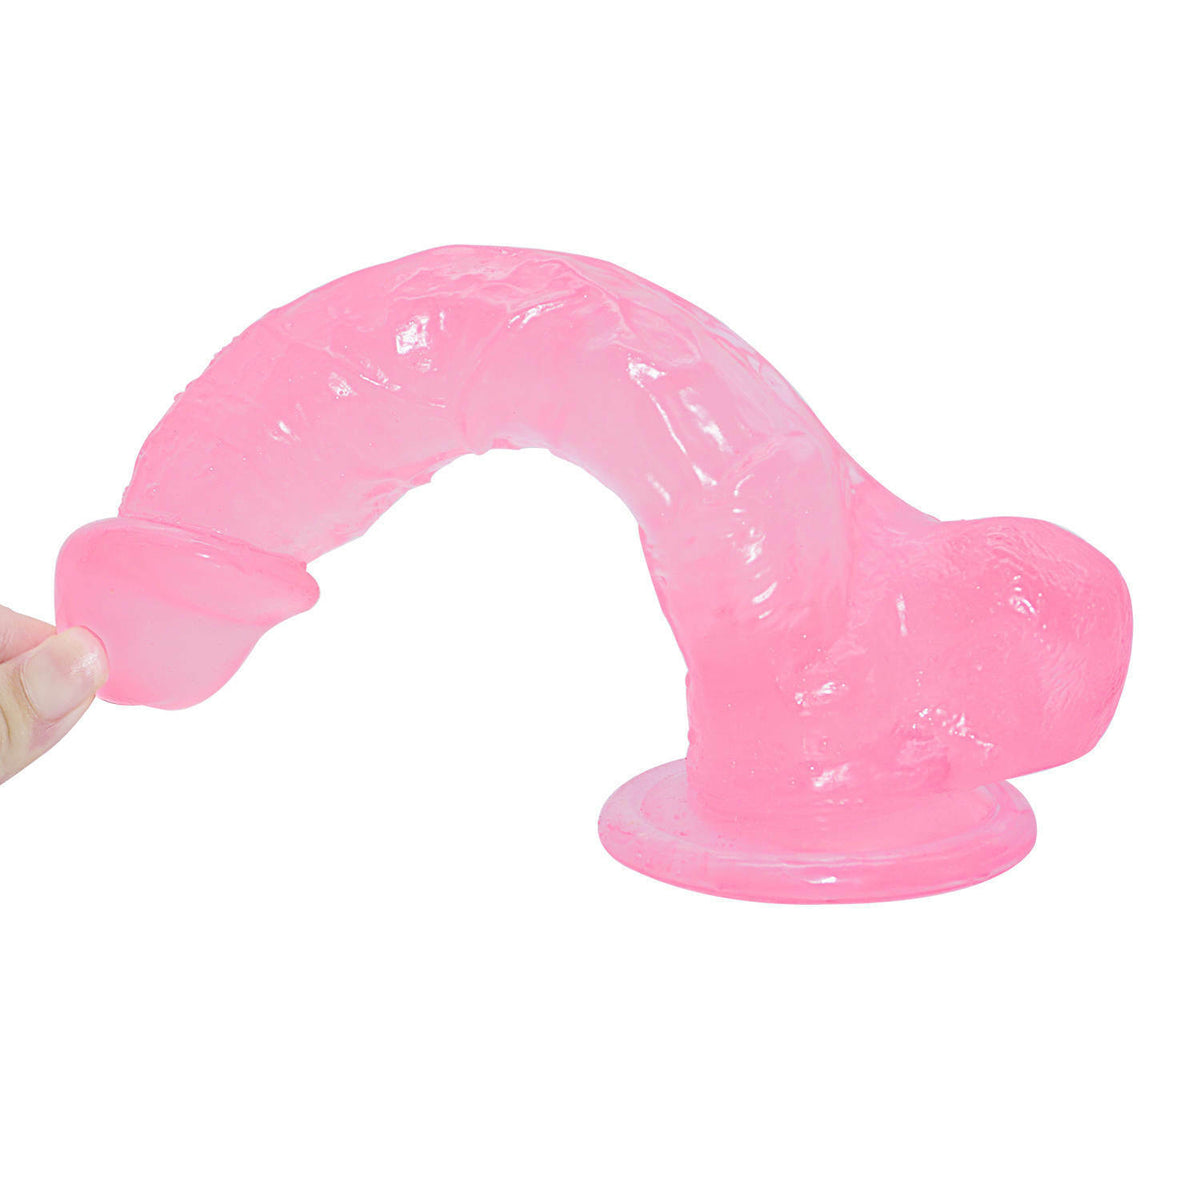 Big 9 Inch Realistic Pink Suction Cup Dildo